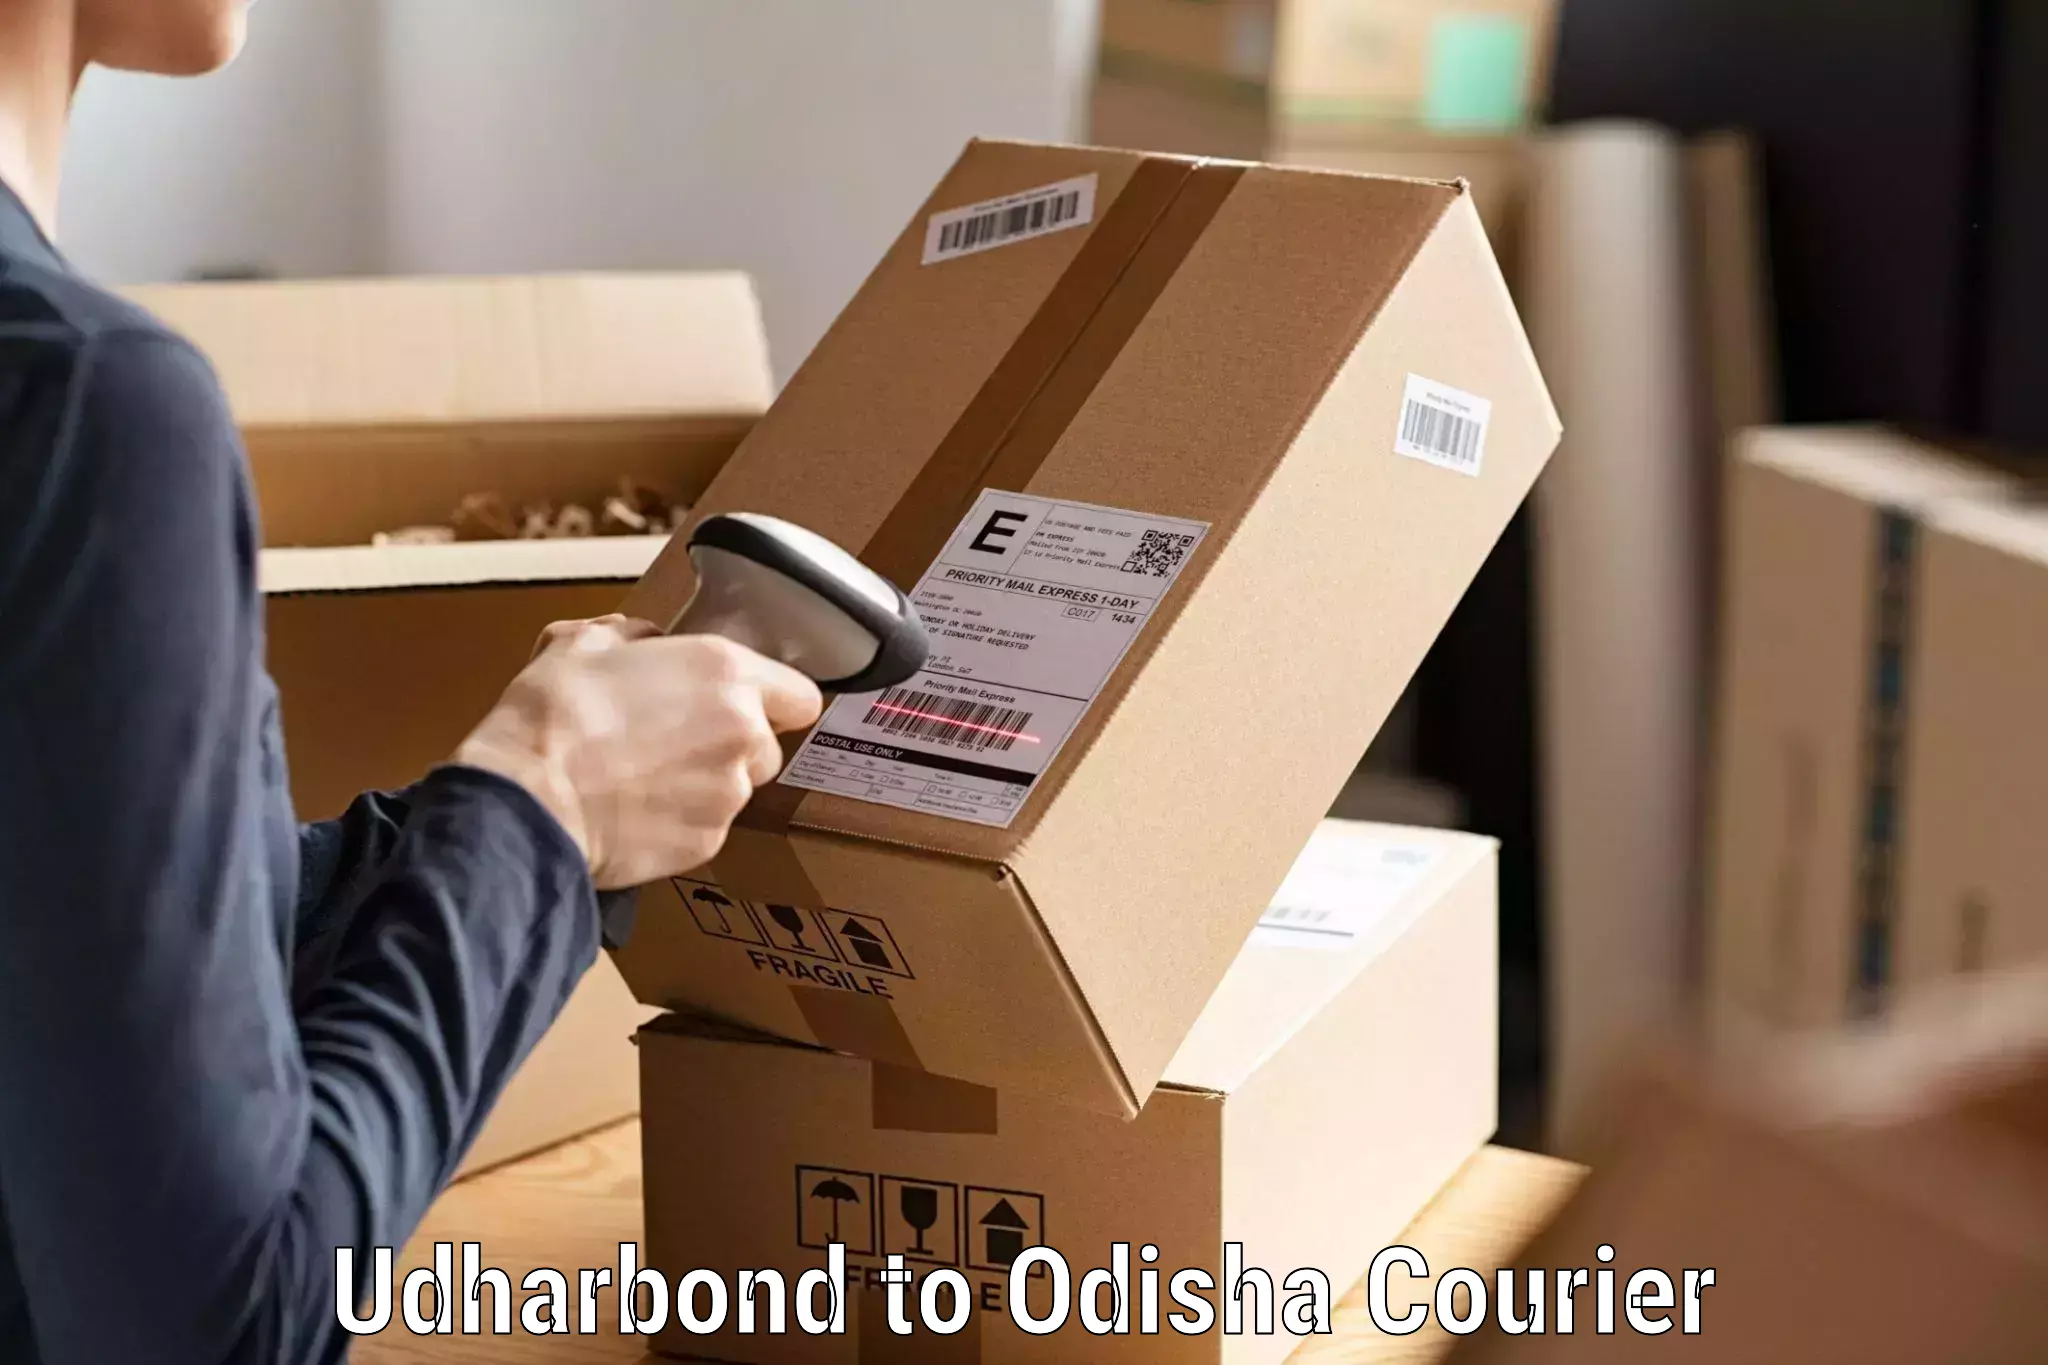 Professional parcel services in Udharbond to Nabarangpur